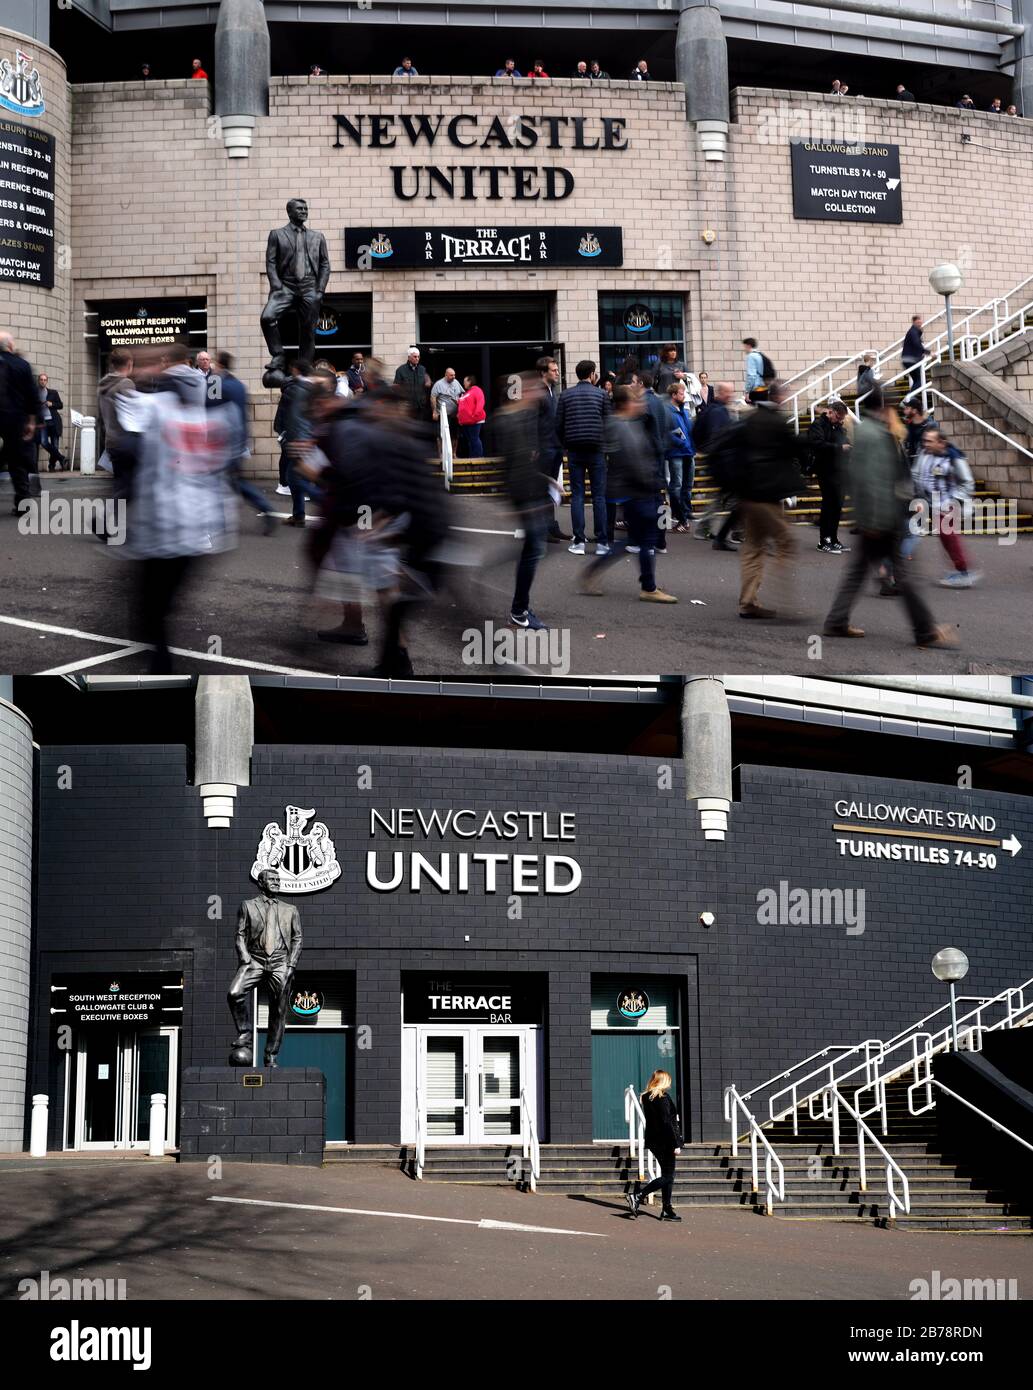 A composite photo showing St James Park, Newcastle United on 01-10-2017 (top) and 14-03-2020 (bottom). Stock Photo